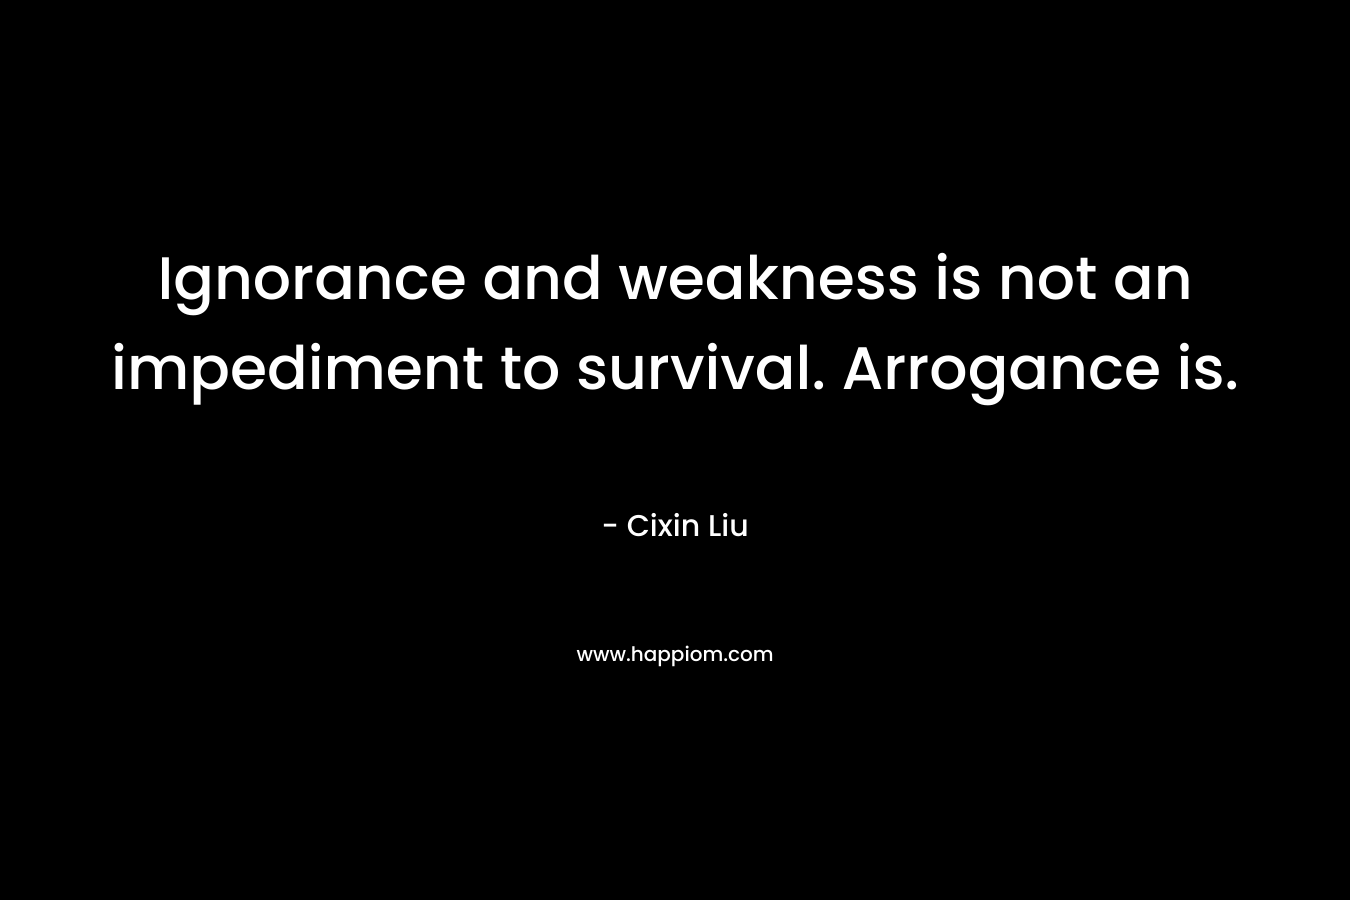 Ignorance and weakness is not an impediment to survival. Arrogance is.